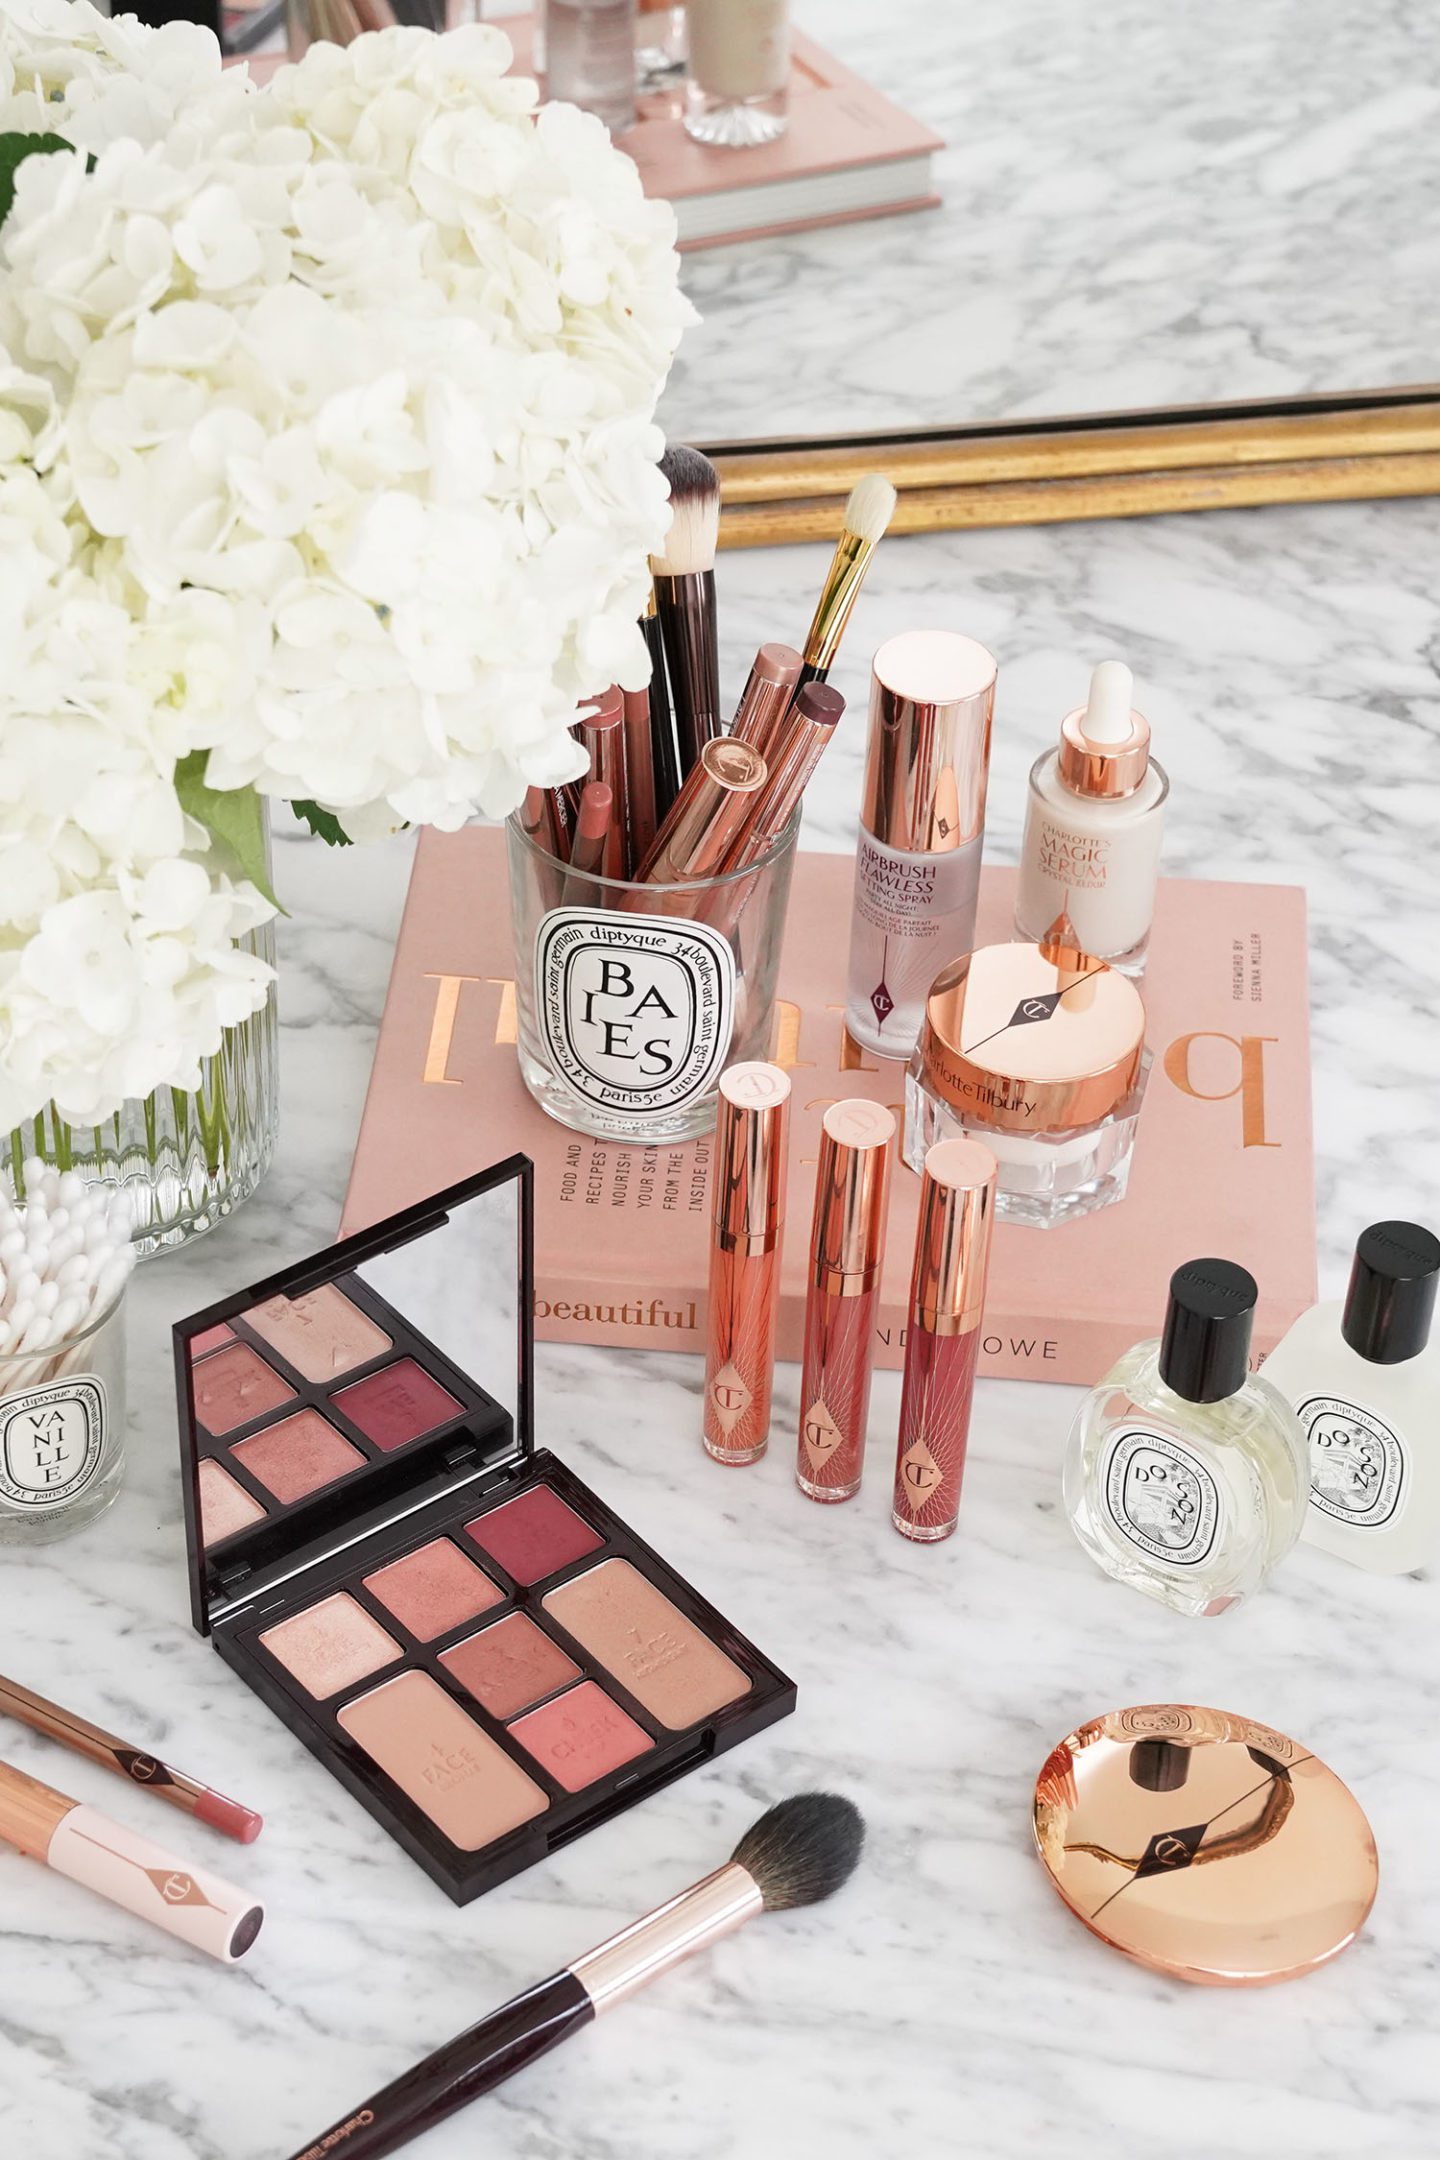 Charlotte Tilbury x Nordstrom Anniversary Sale Beauty Exclusives